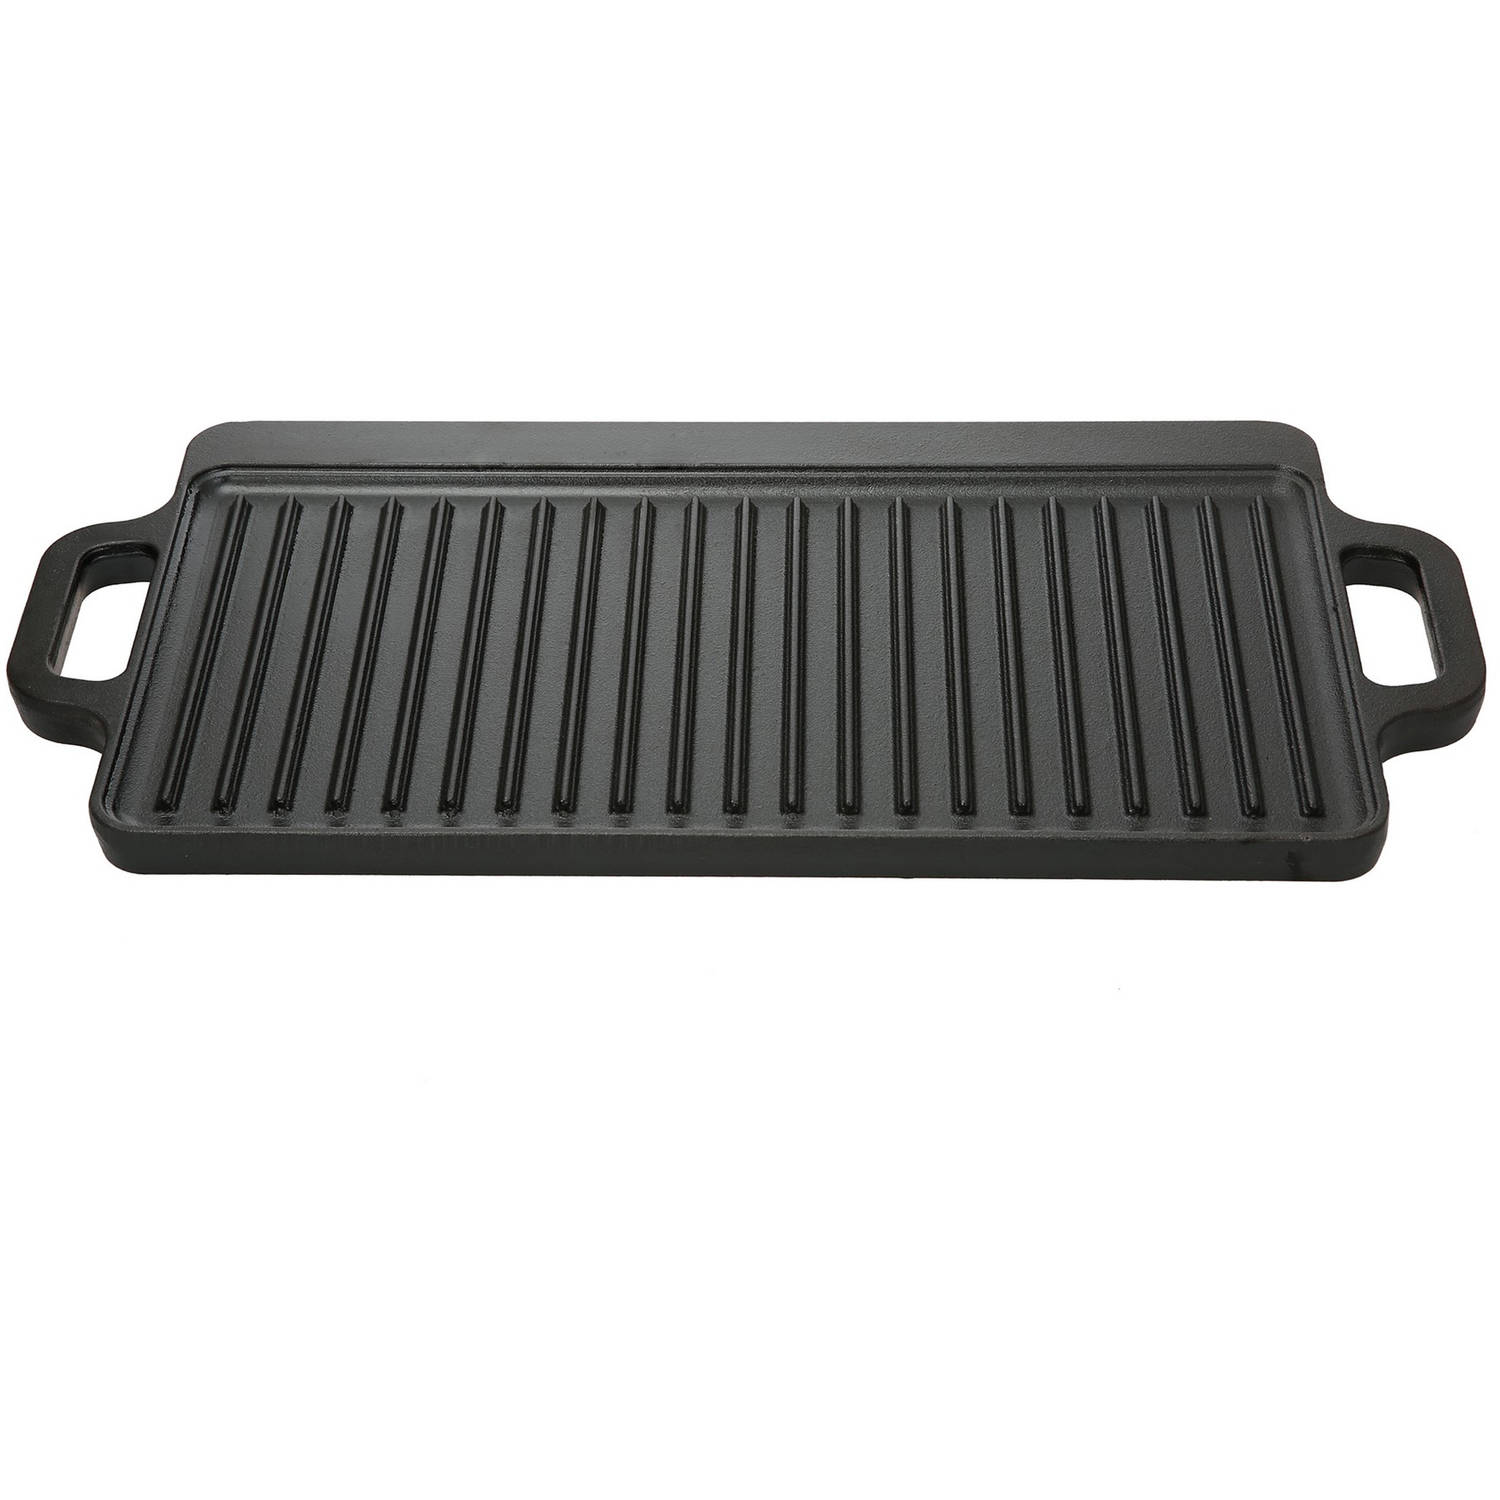 Ozark Trail 9 in Cast Iron Griddle (Reversible, 16.5 x 9 in) - image 1 of 2